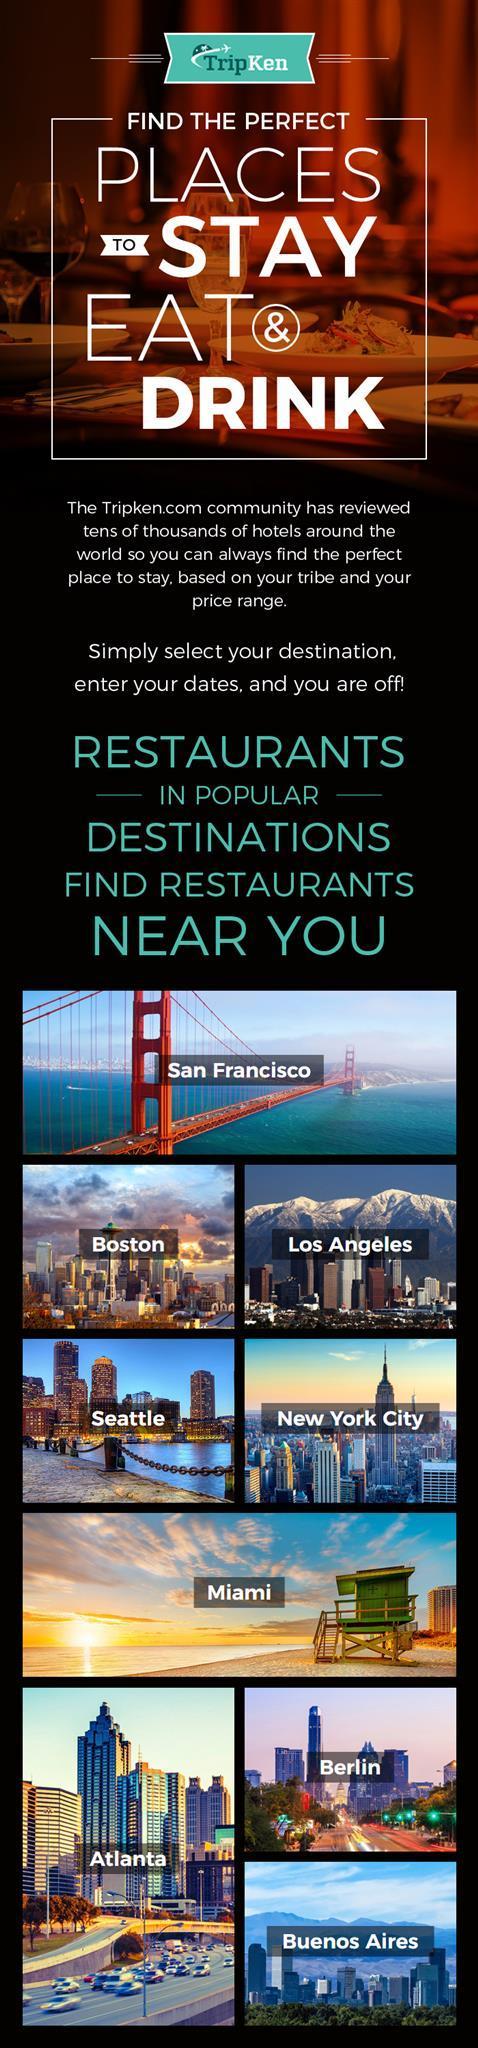 Find the Perfect Places to Stay, Eat & Drink with TripKen